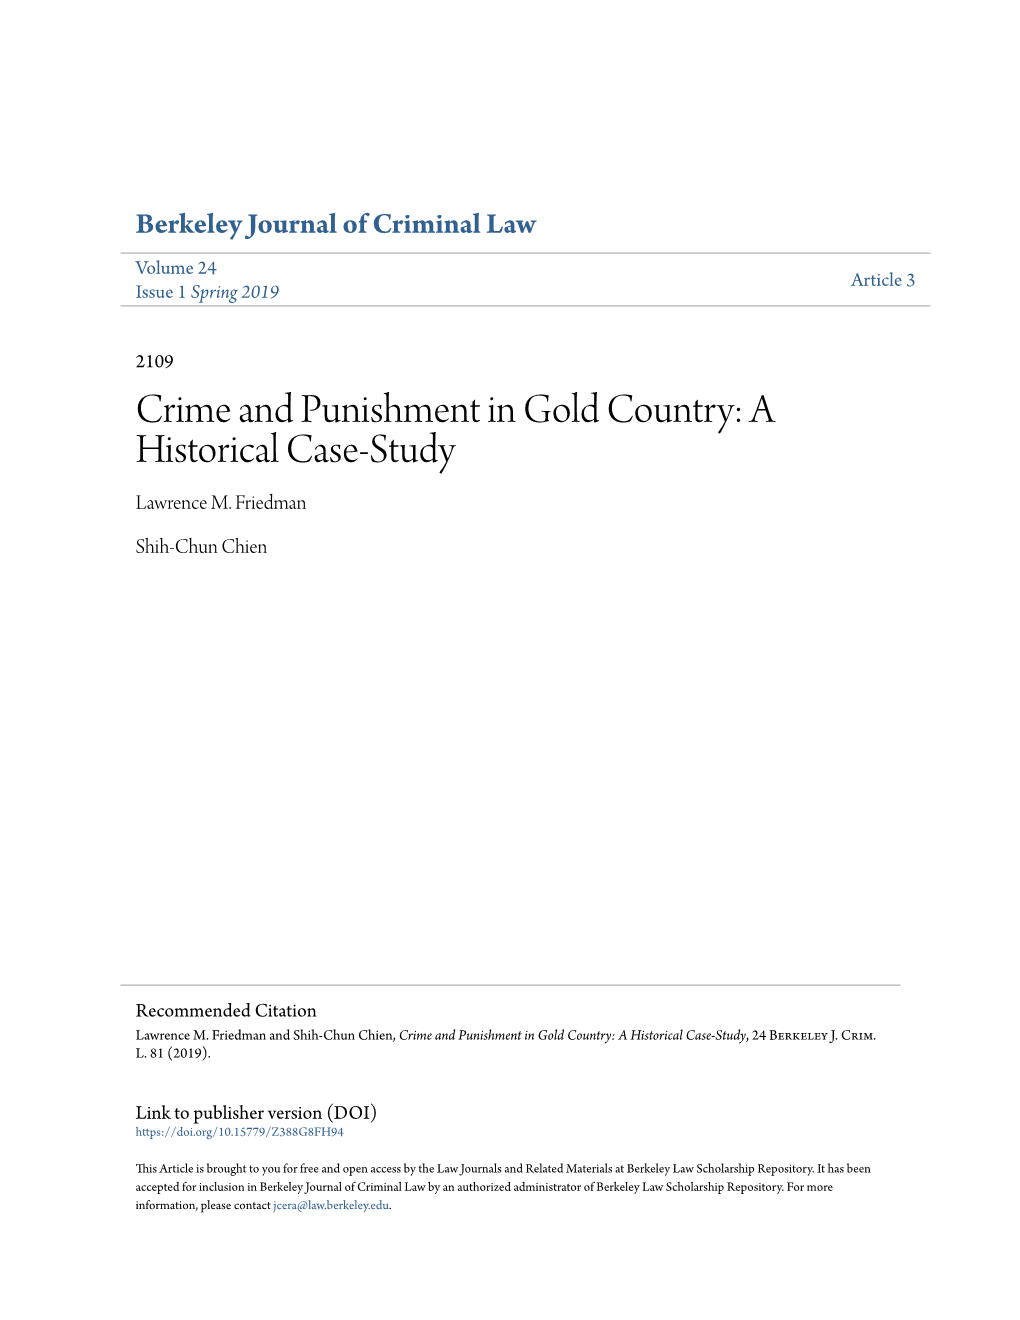 Crime and Punishment in Gold Country: a Historical Case-Study Lawrence M